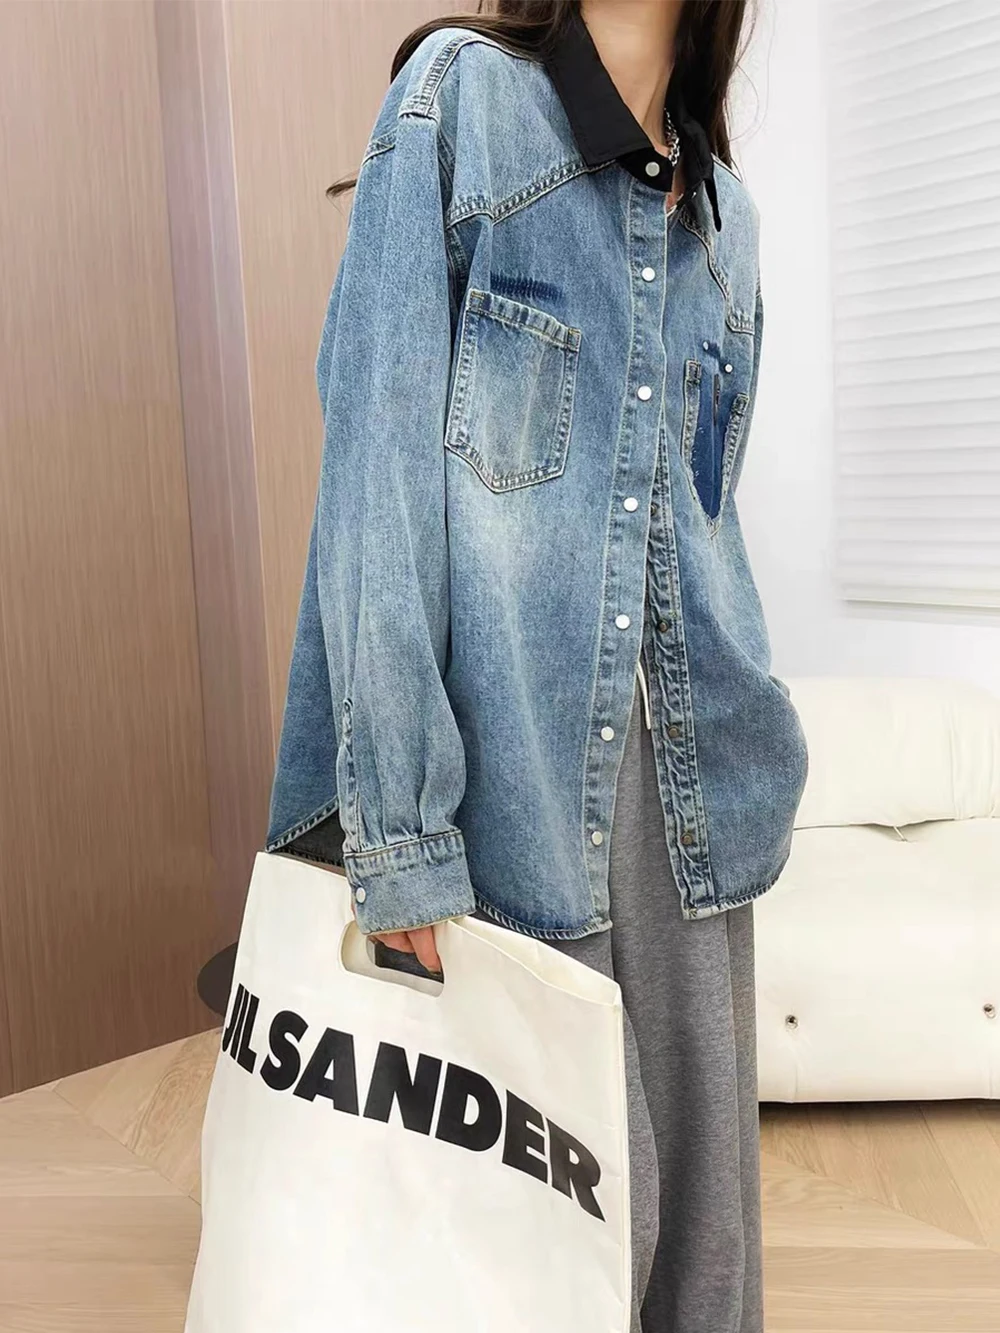 

Washed Denim Lapel Shirt Women Pocket Letters Decorate Single Breasted Long-Sleeve Black Collar Tops Loose Fashion Coat Lady